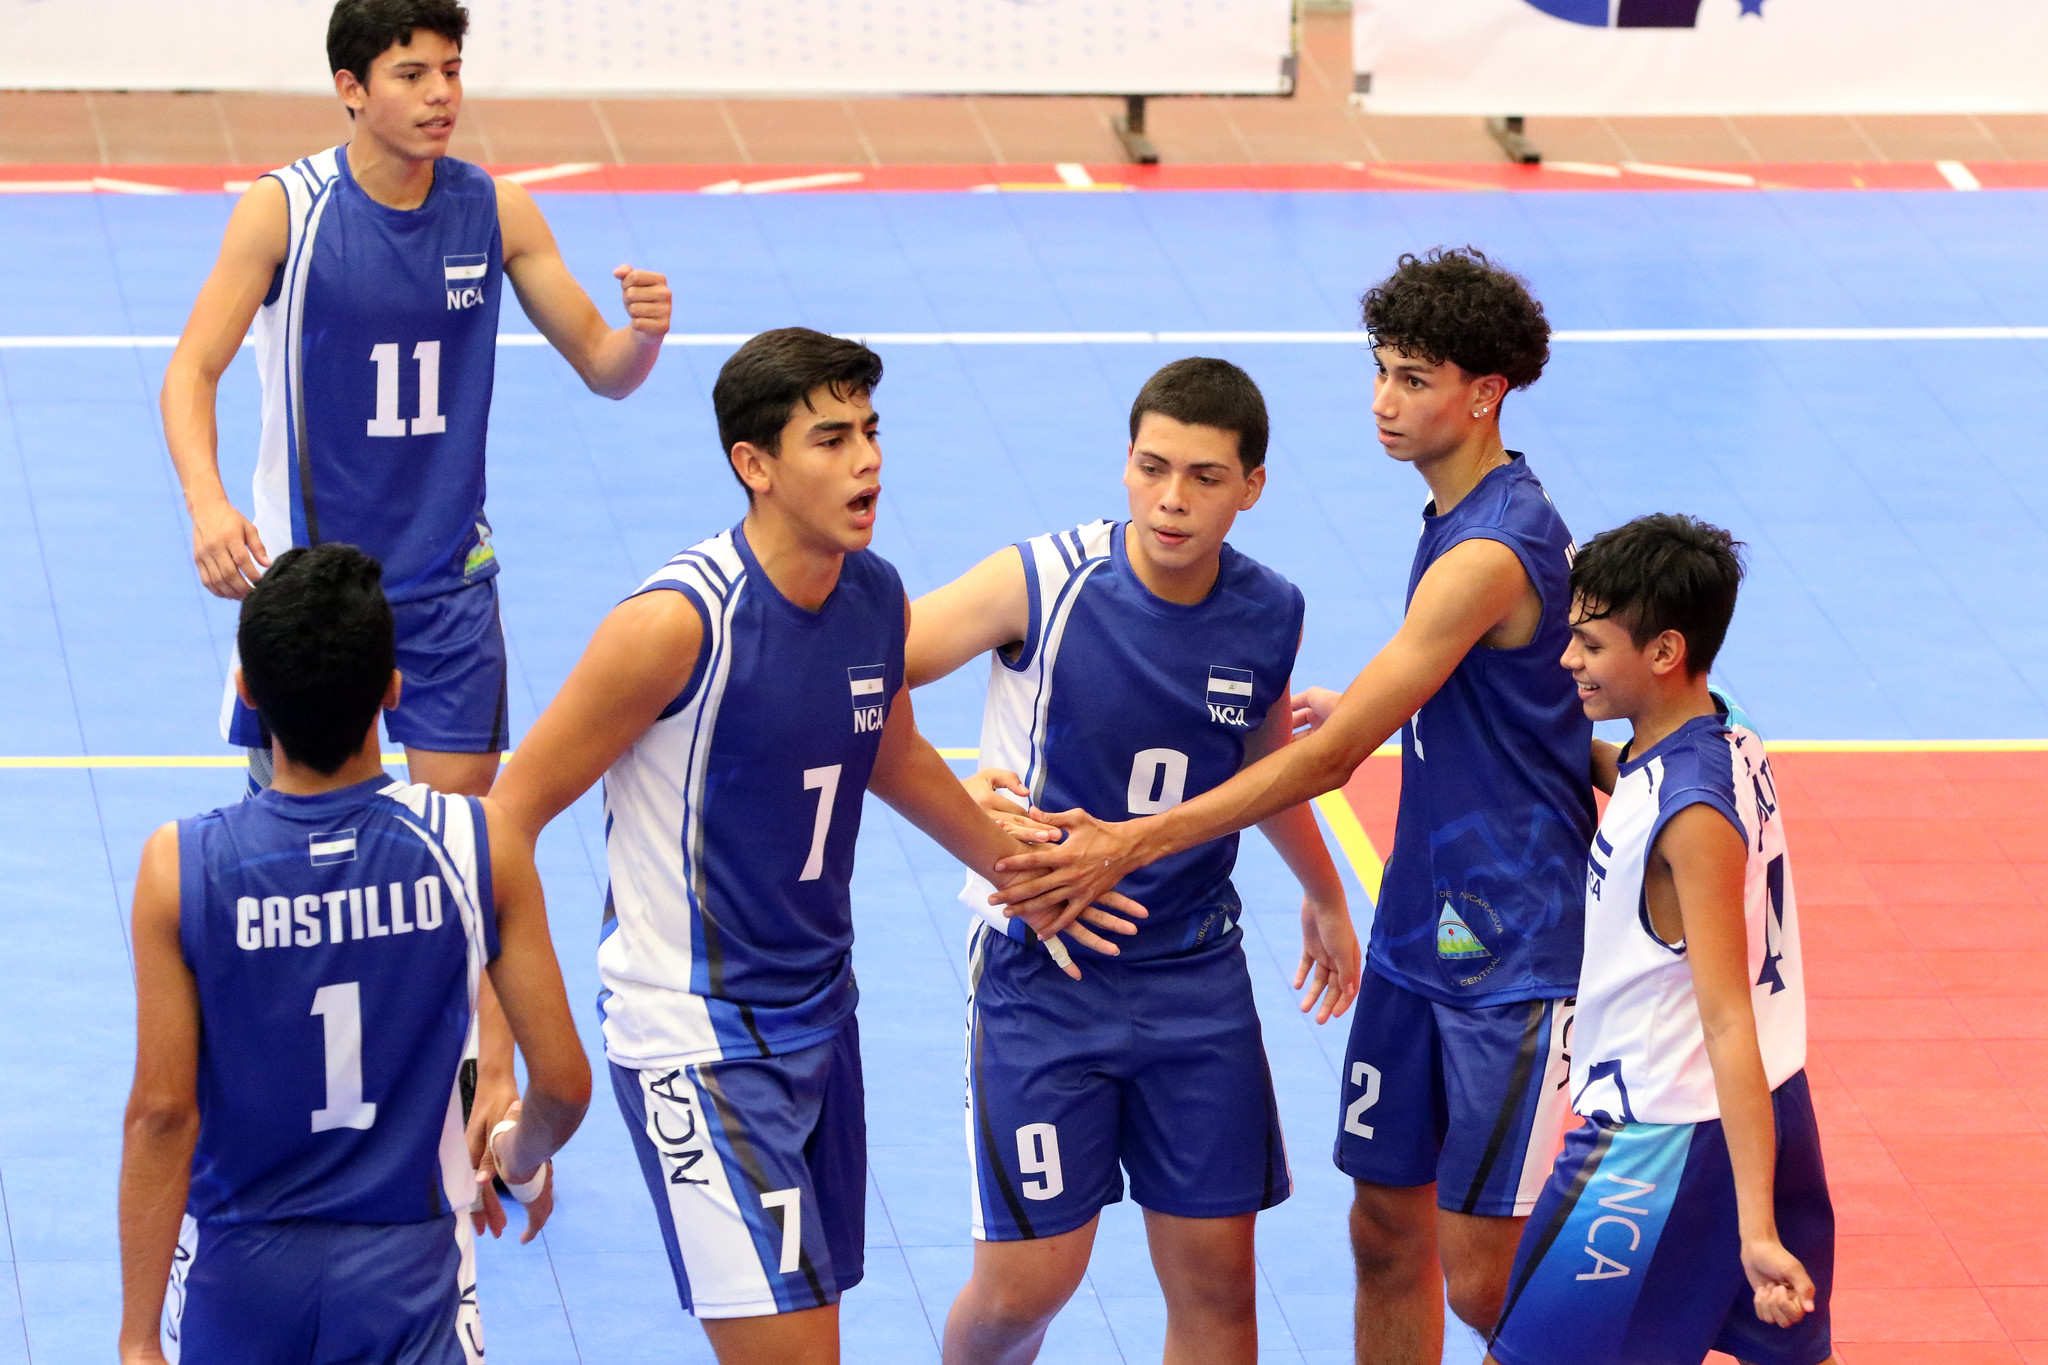 Nicaragua with another comeback win in five sets 